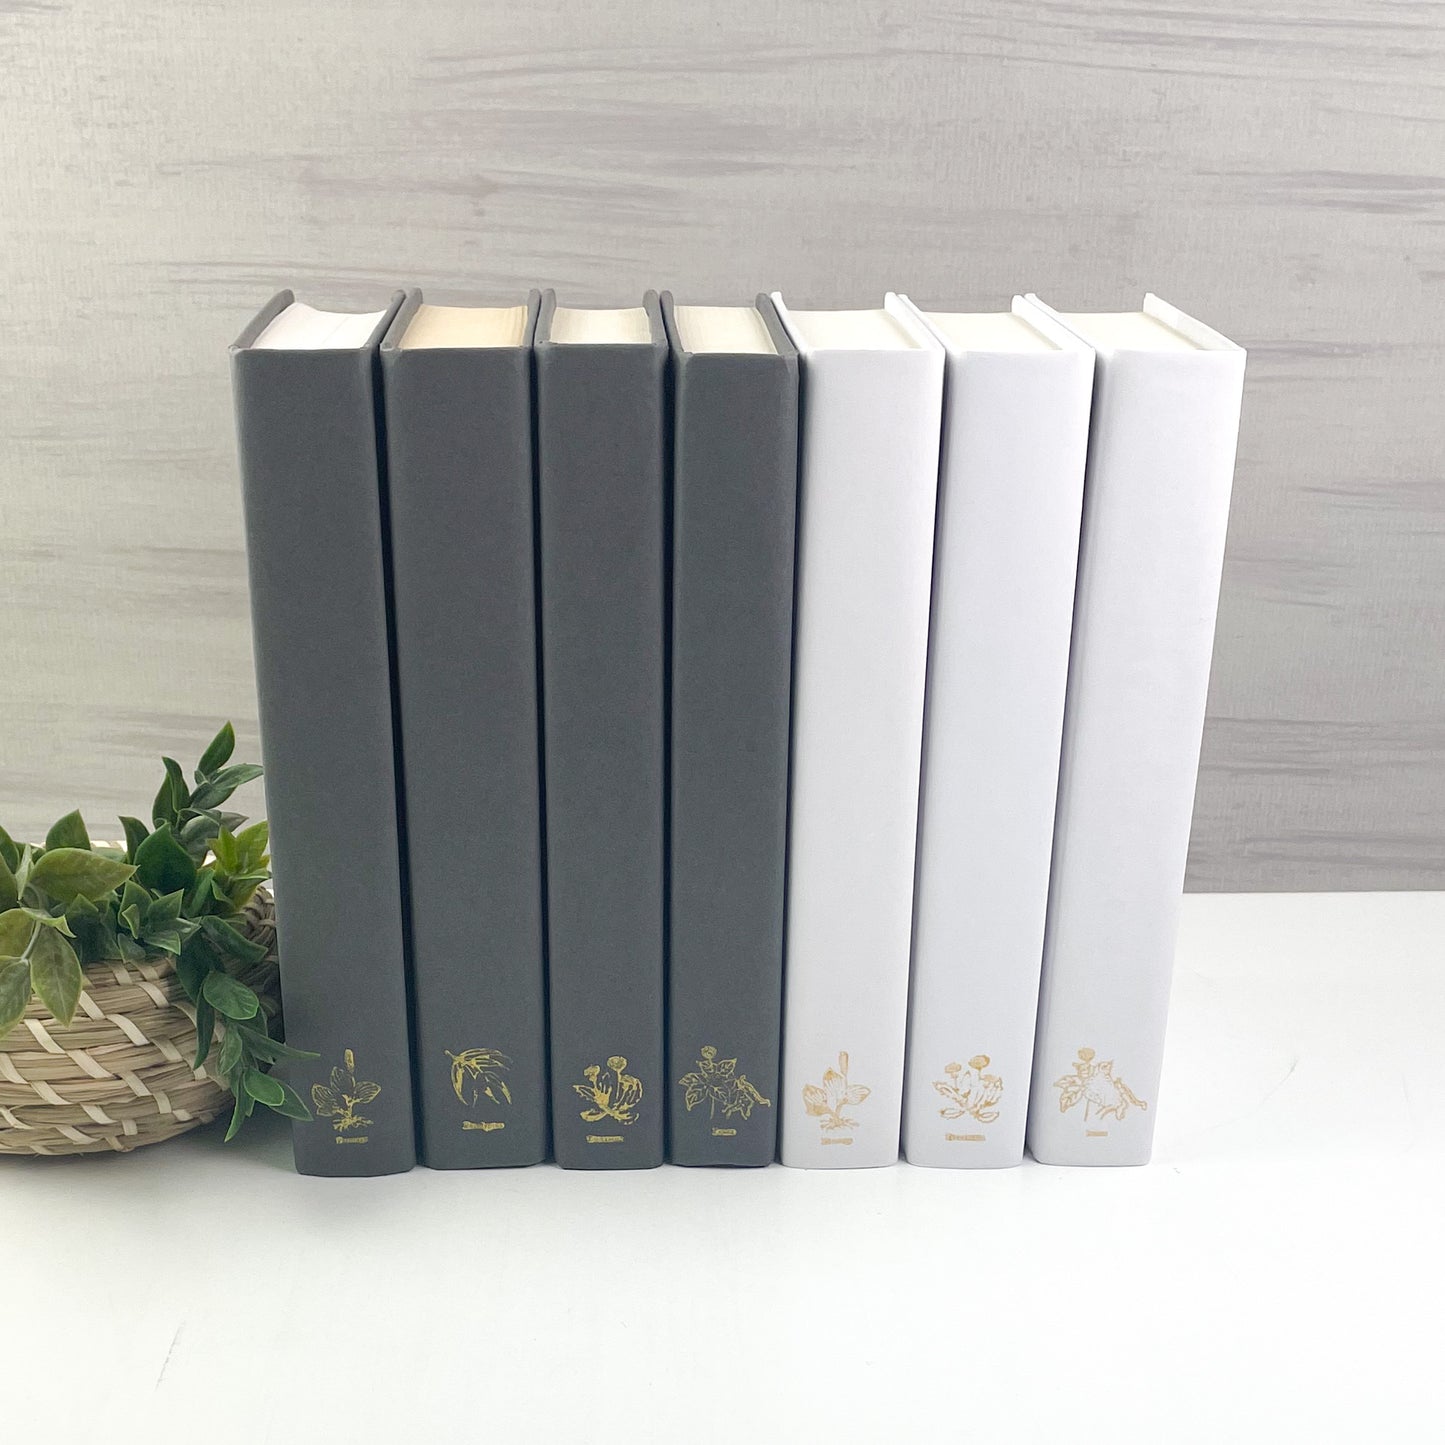 Stamped Decorative Books for Home Decor